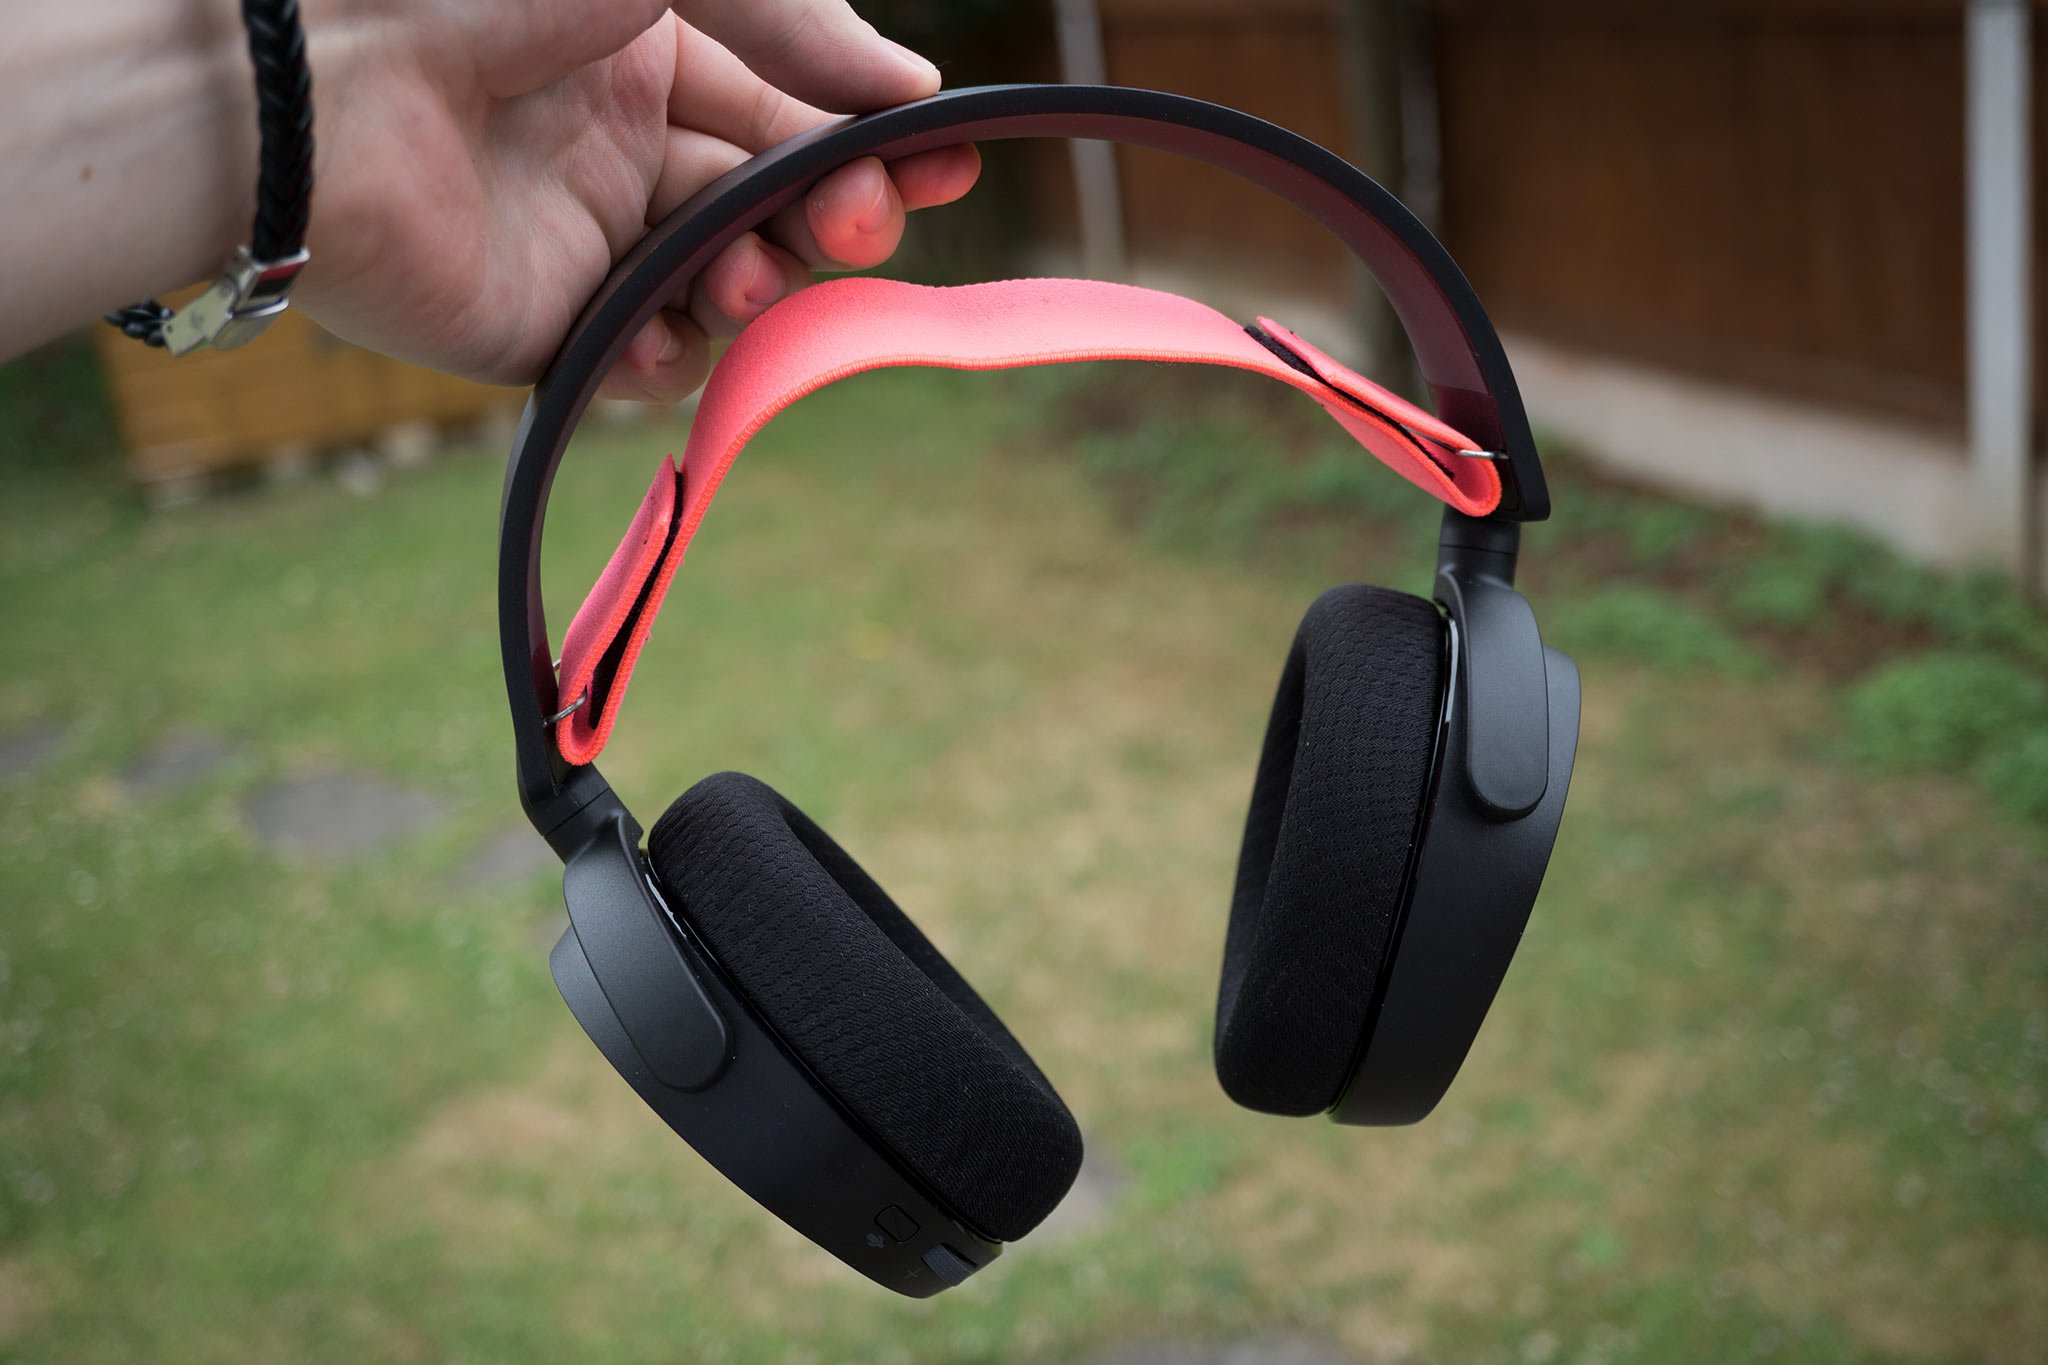 Steelseries Arctis 5 Is A Comfy Quality Gaming Headset That S Also Affordable Windows Central